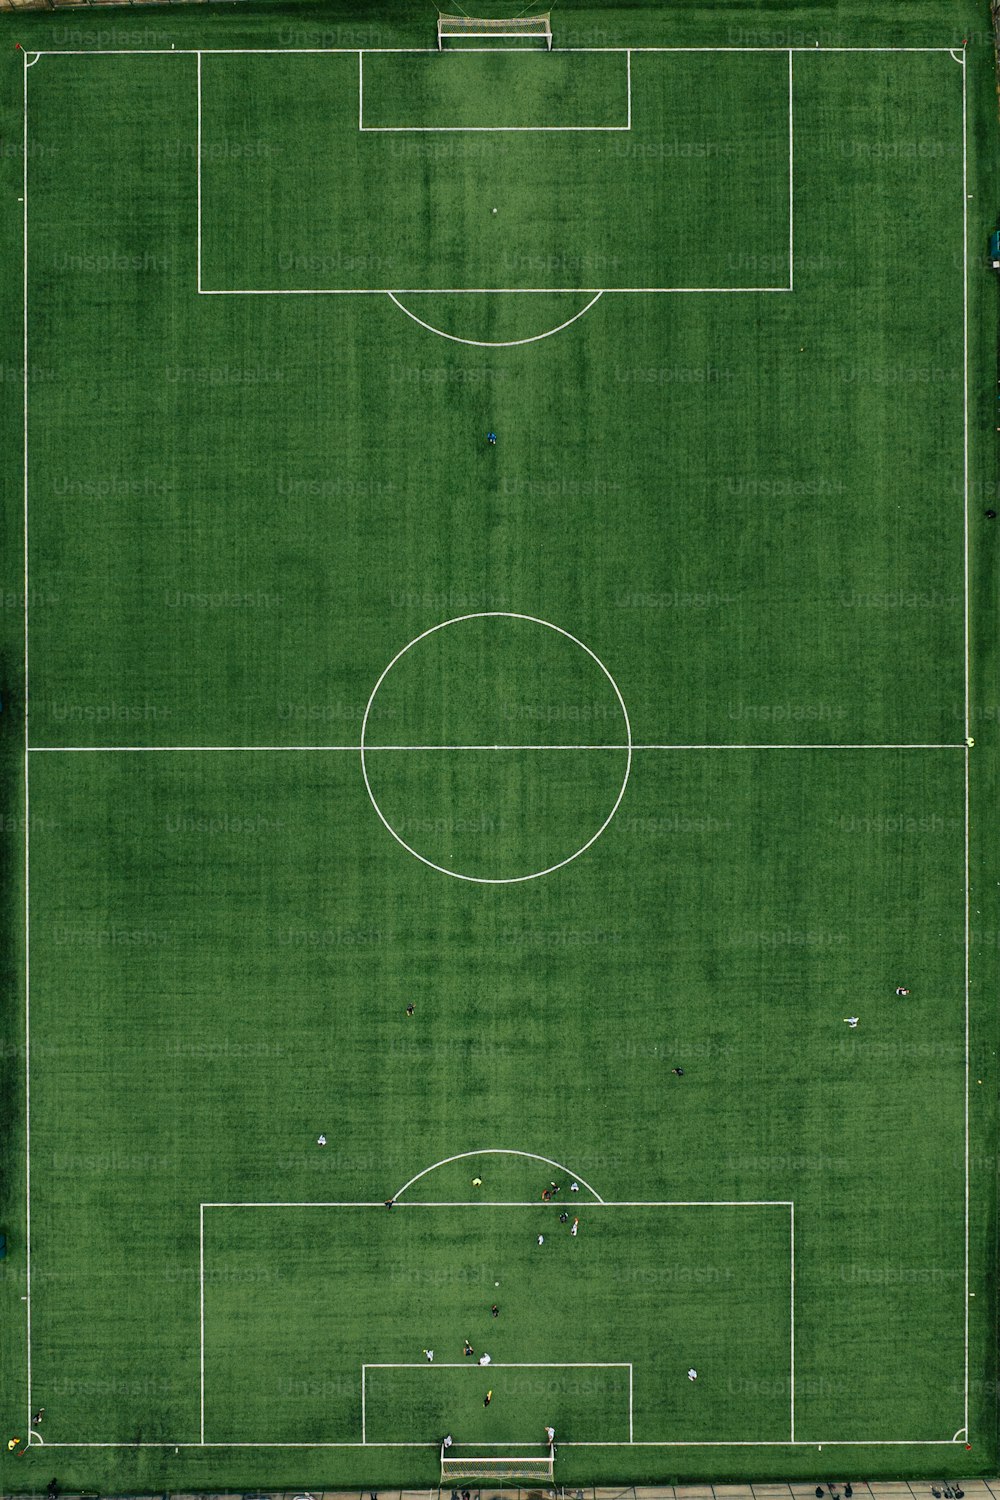 an aerial view of a soccer field from above